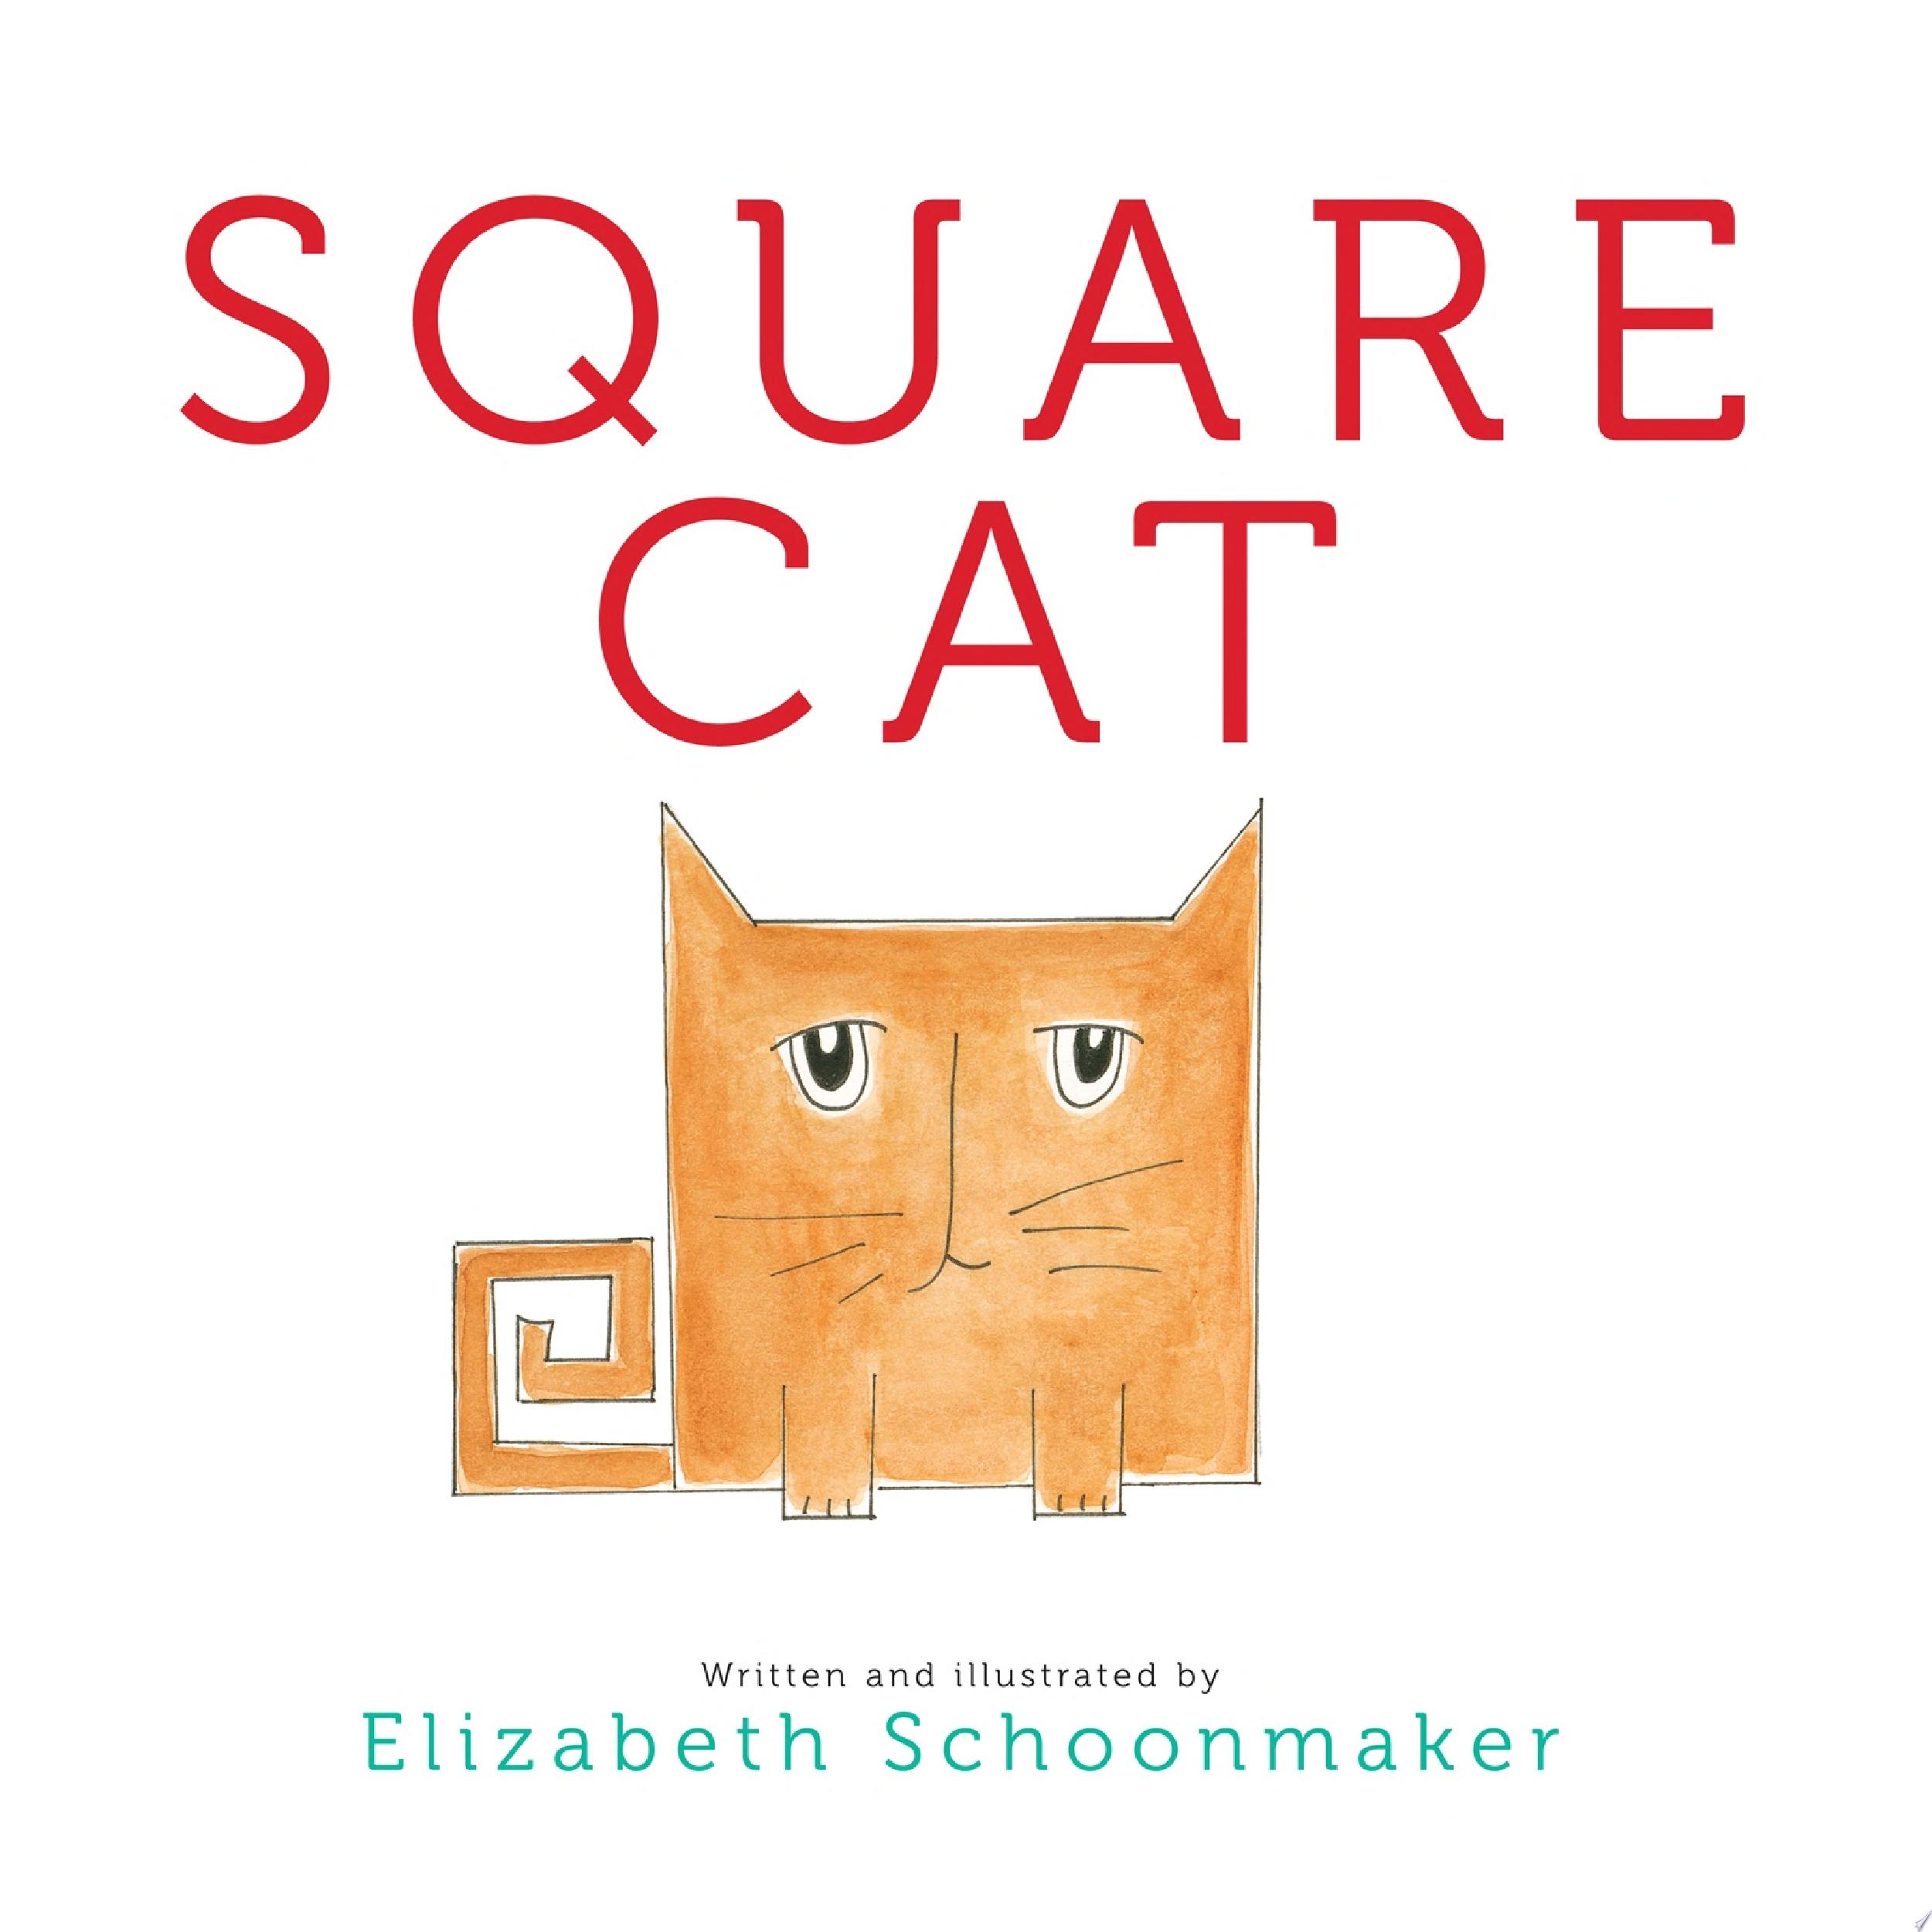 Image for "Square Cat"